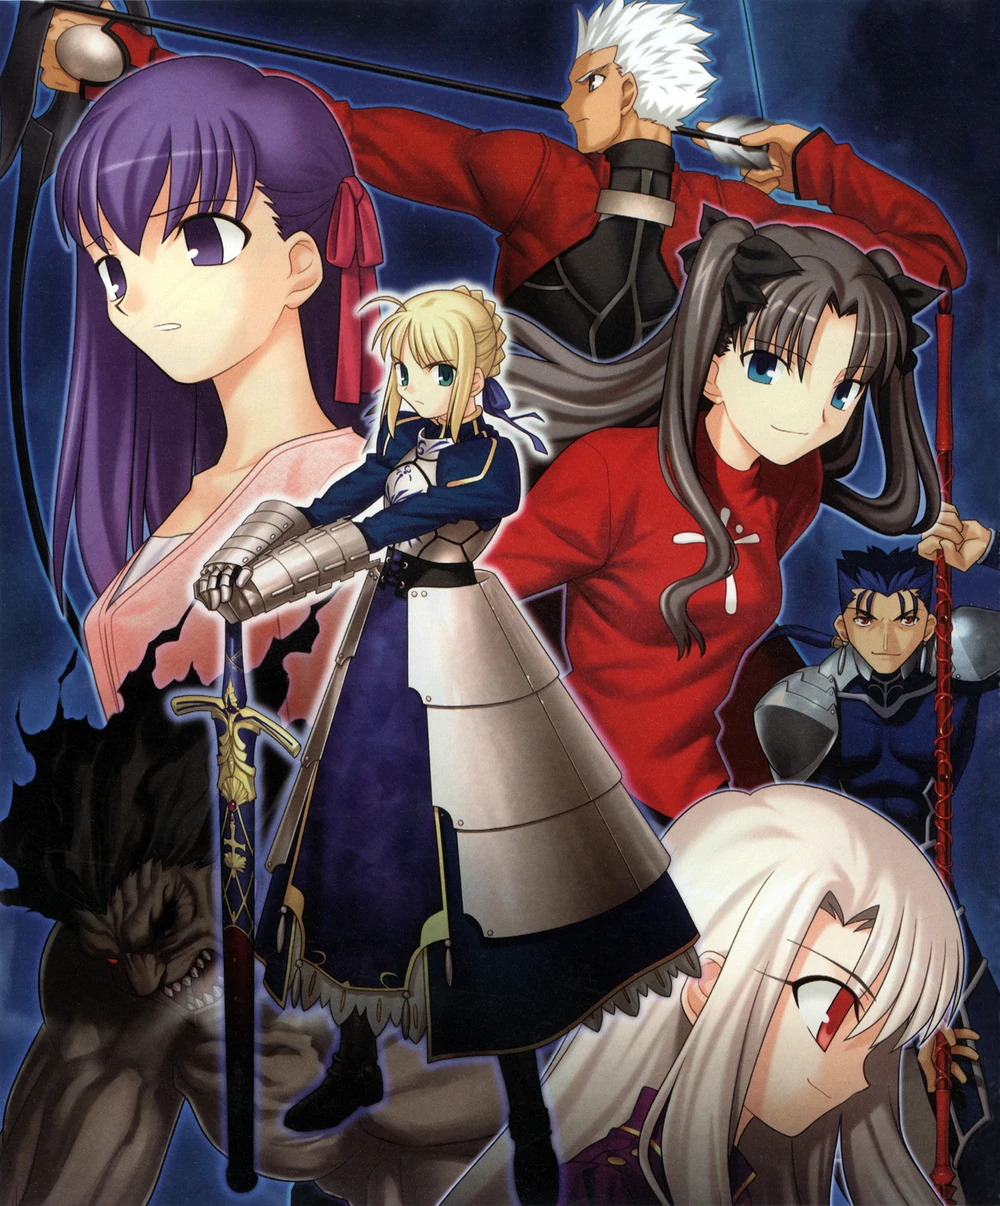 Cover Image for Fate/stay night: 試問。你就是我的御主嗎？